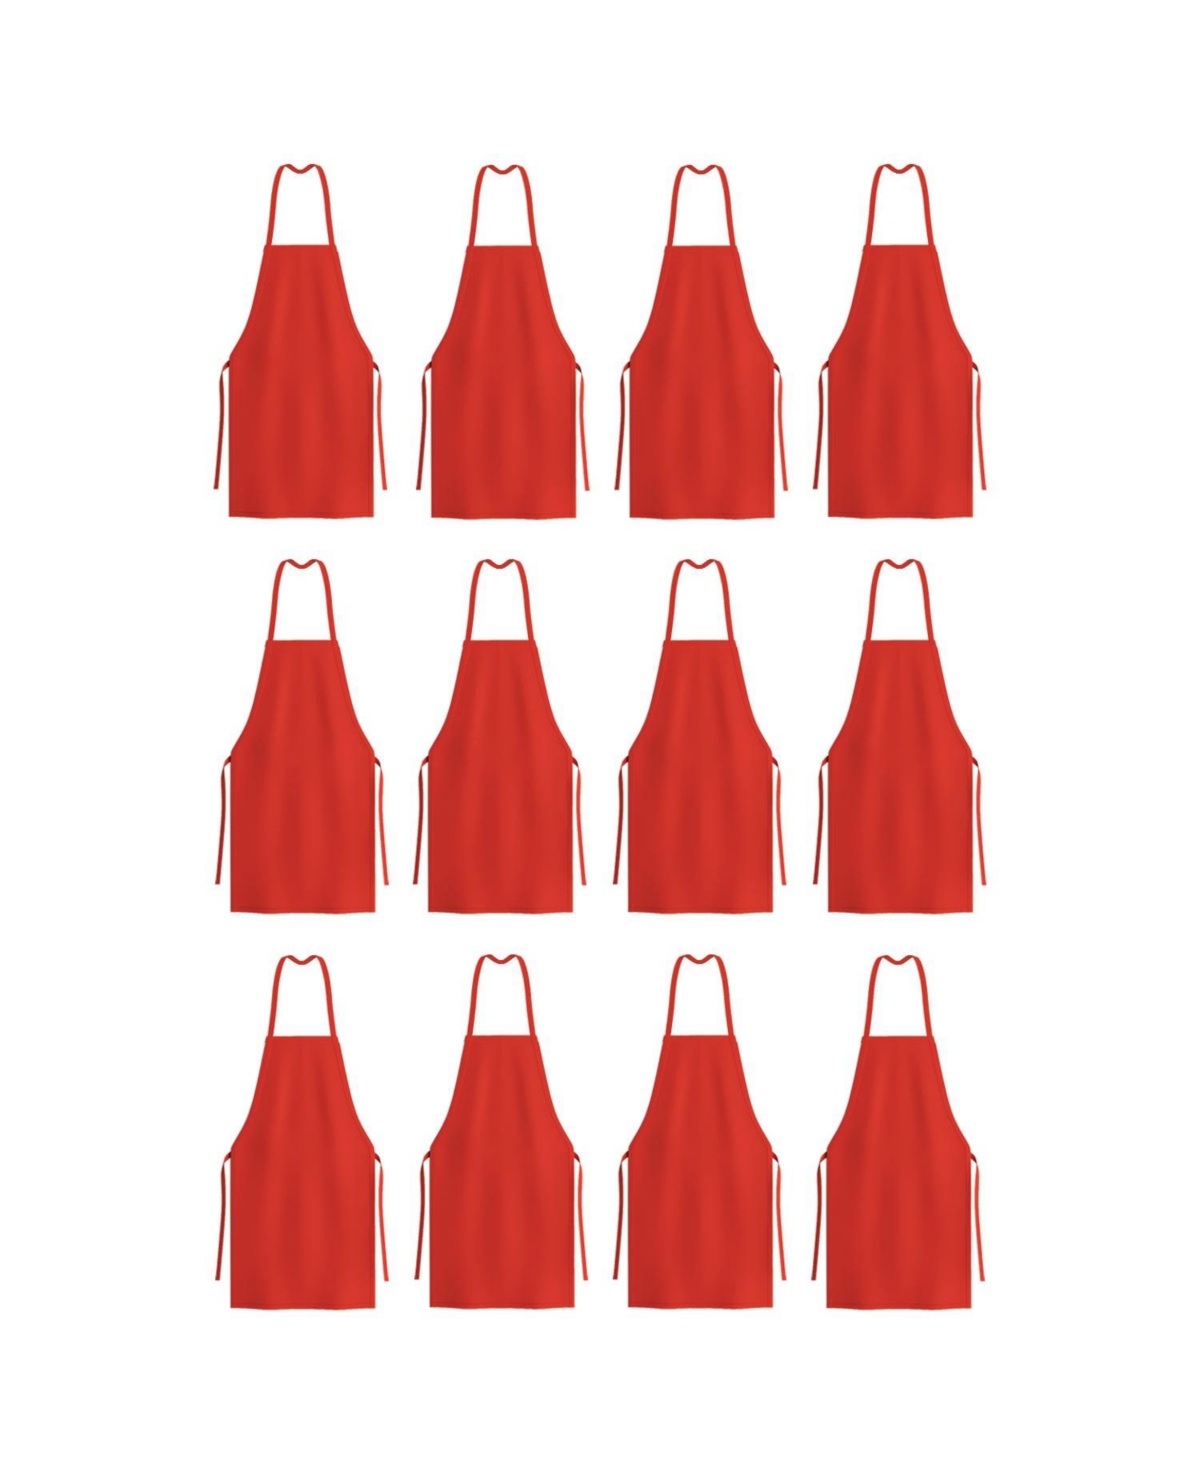 Arkwright Mariposa Bib Aprons (12 Pack), 33x30, Spun Polyester, Color Options, Adjustable Ties - White